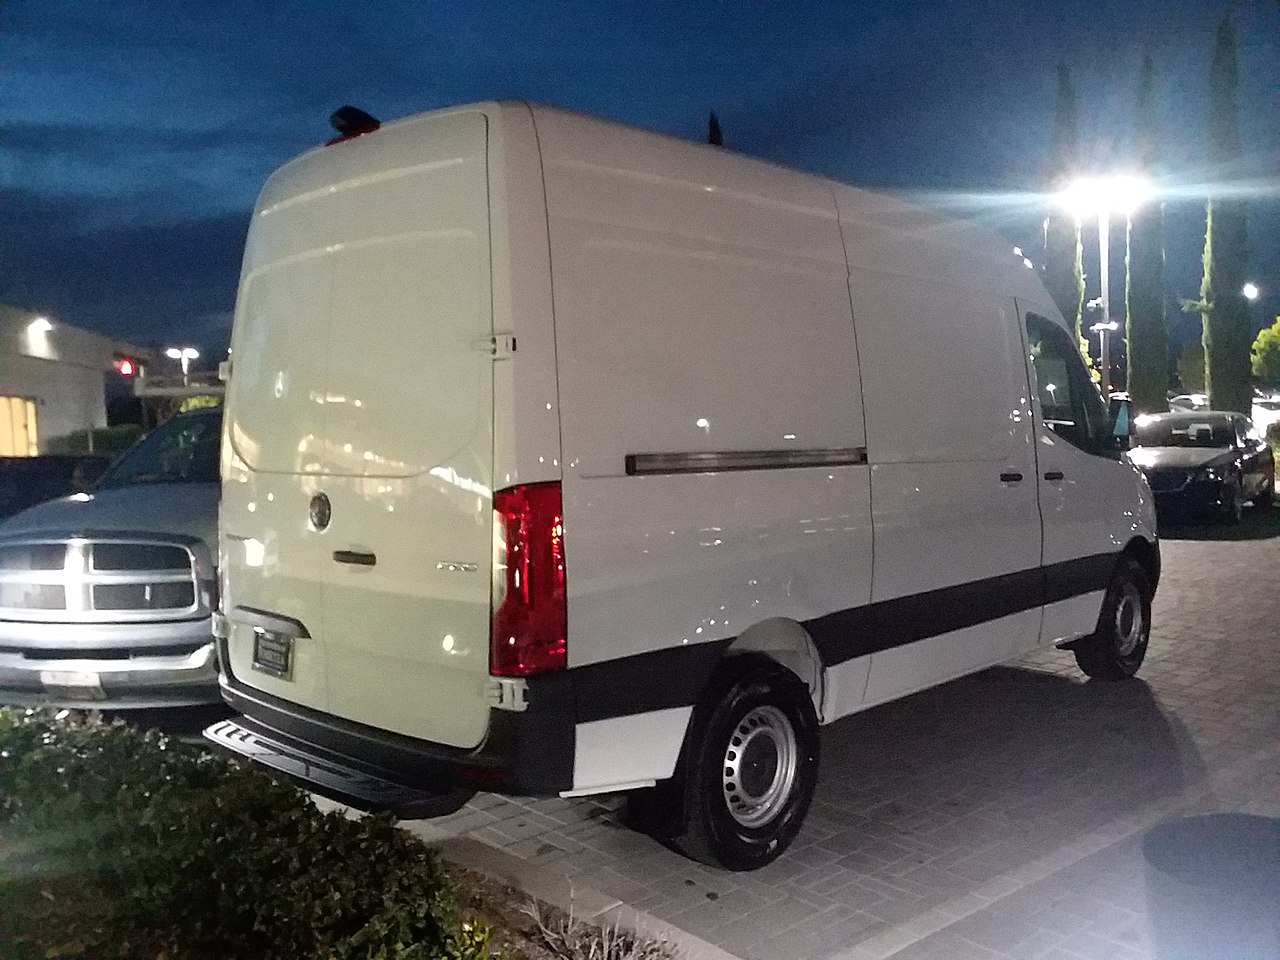 File:Mercedes Benz Sprinter 2500 2019 Back View 02.jpg - Wikimedia Commons